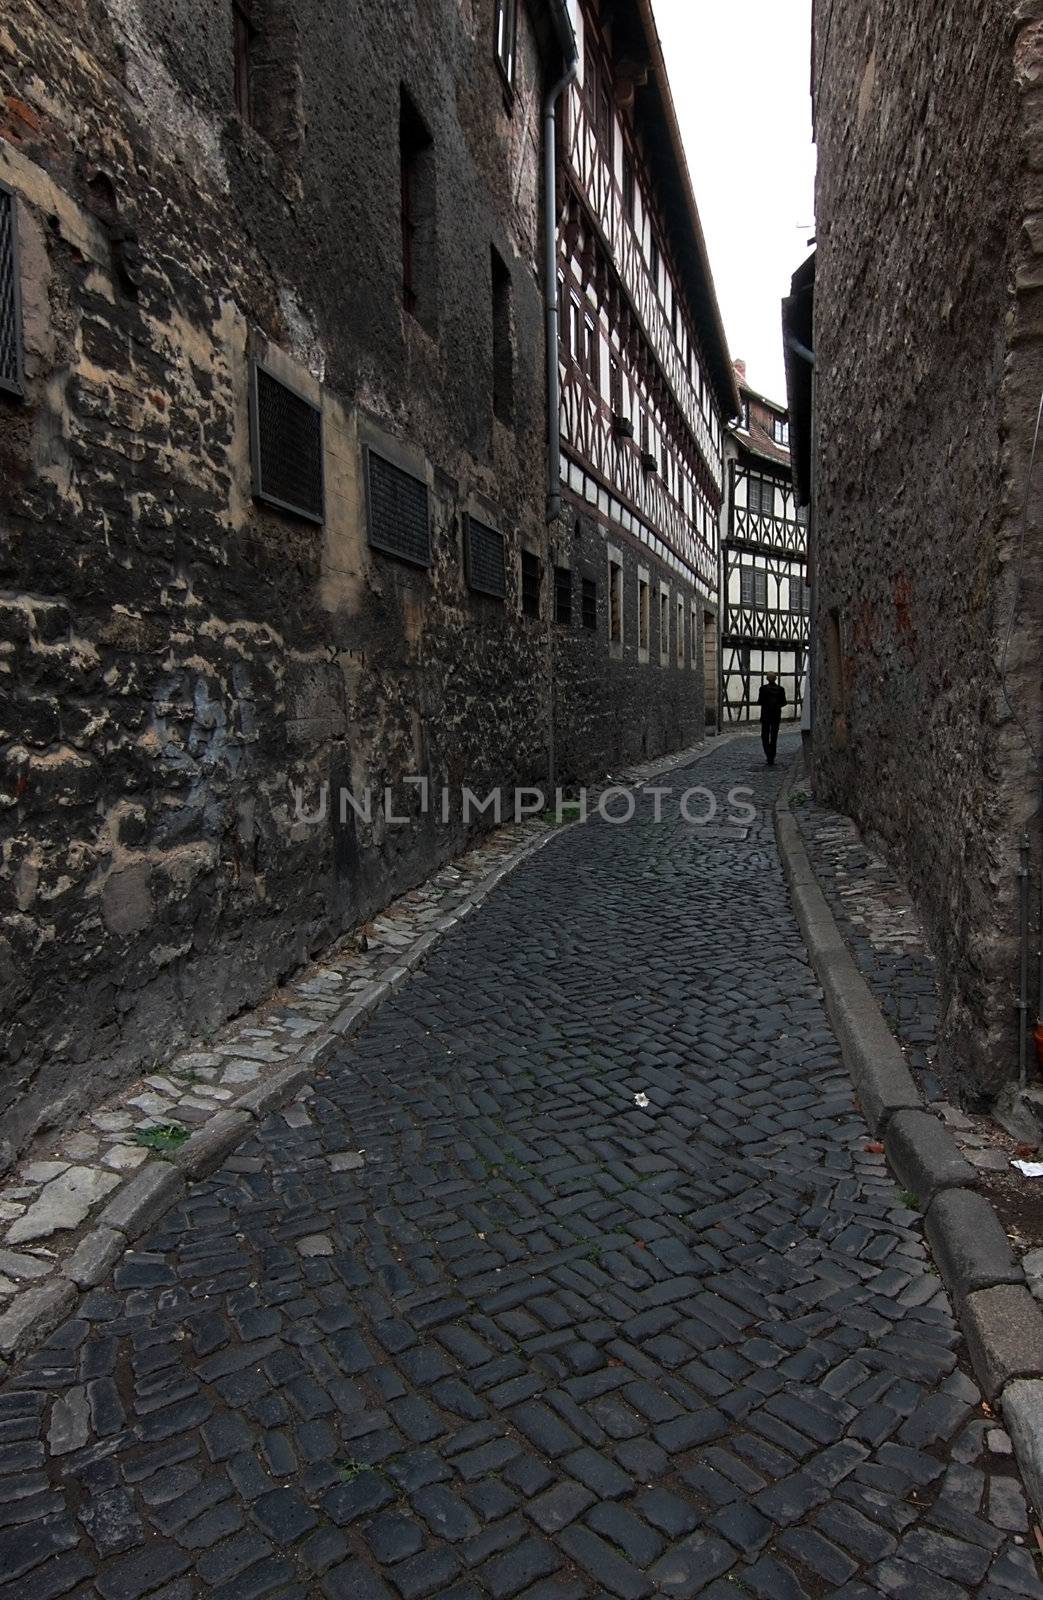 touneel street in between of two walls and single man